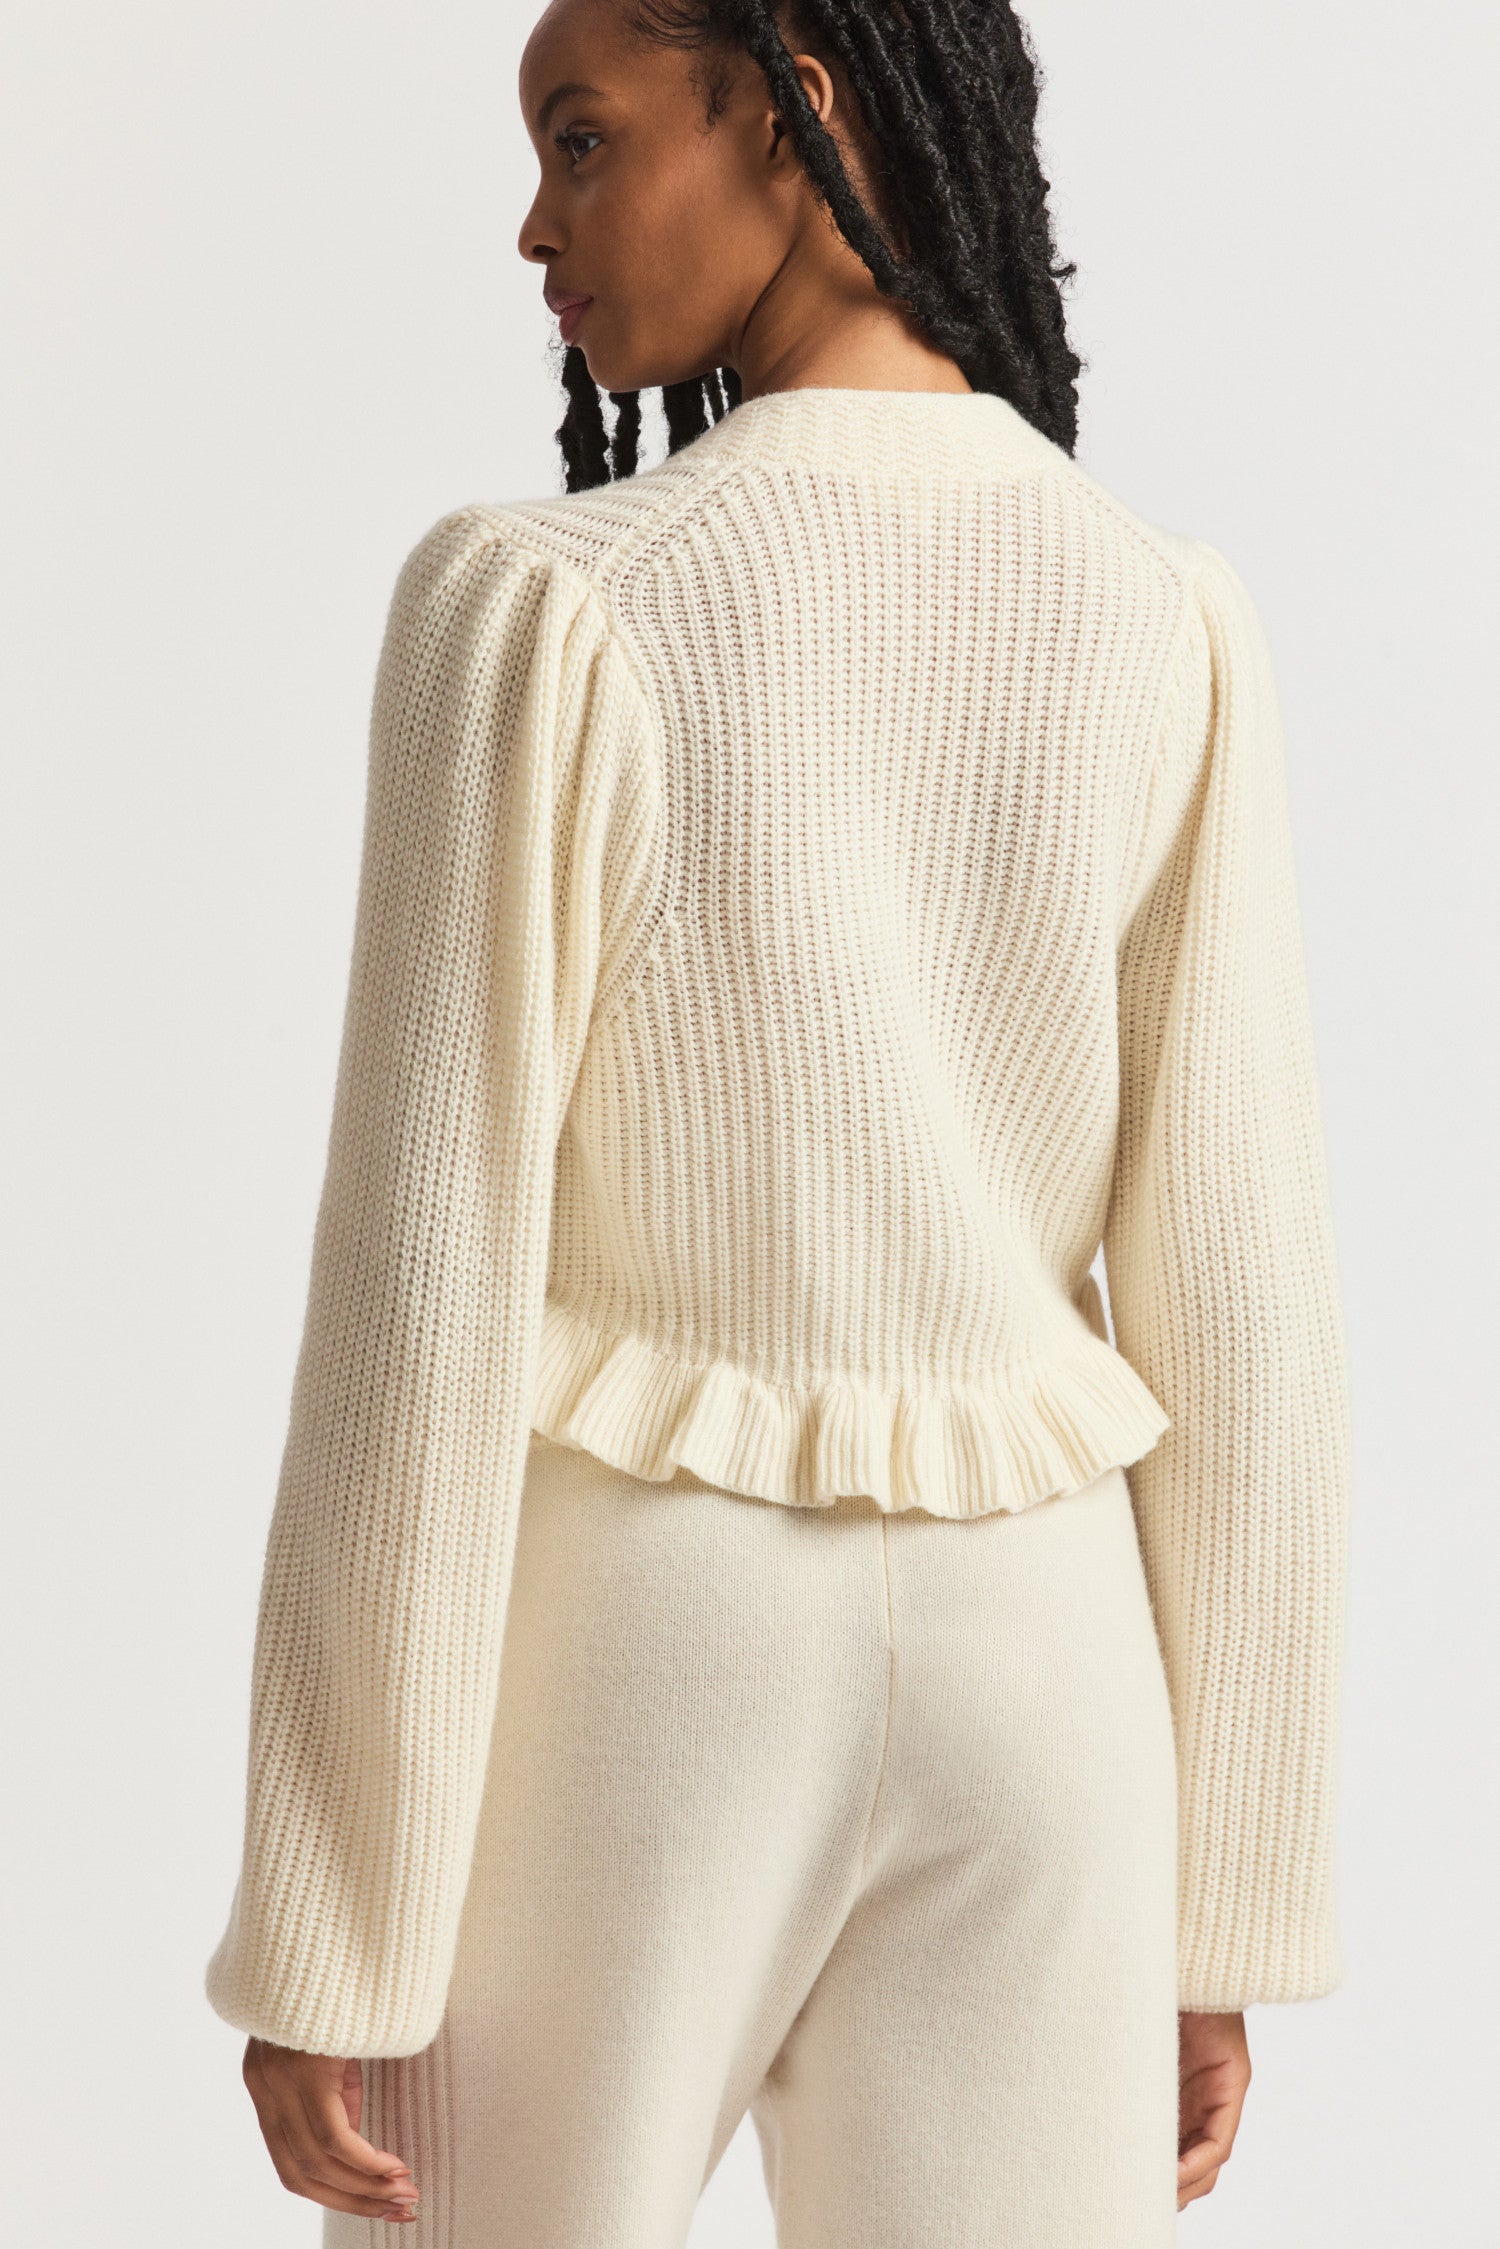 Cream cardigan in ultra-soft cashmere-wool blend with intricate ribbed knit techniques. With a v-neck that descends to three round buttons at the center front and pretty blouson sleeves. 